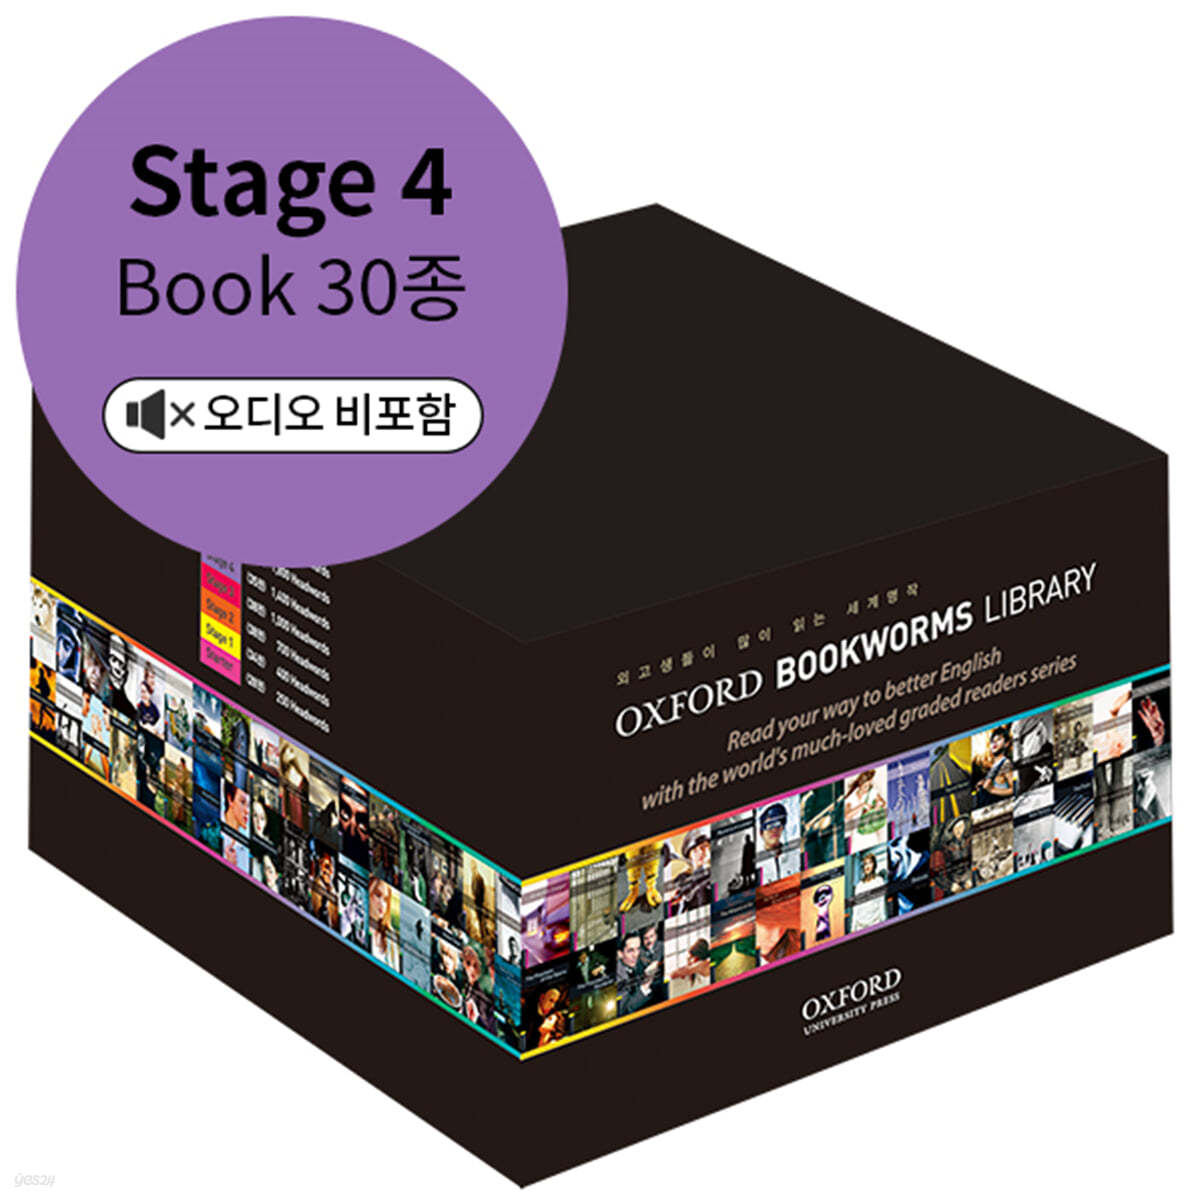 Oxford Bookworms Library Stage 4 Pack [30종]